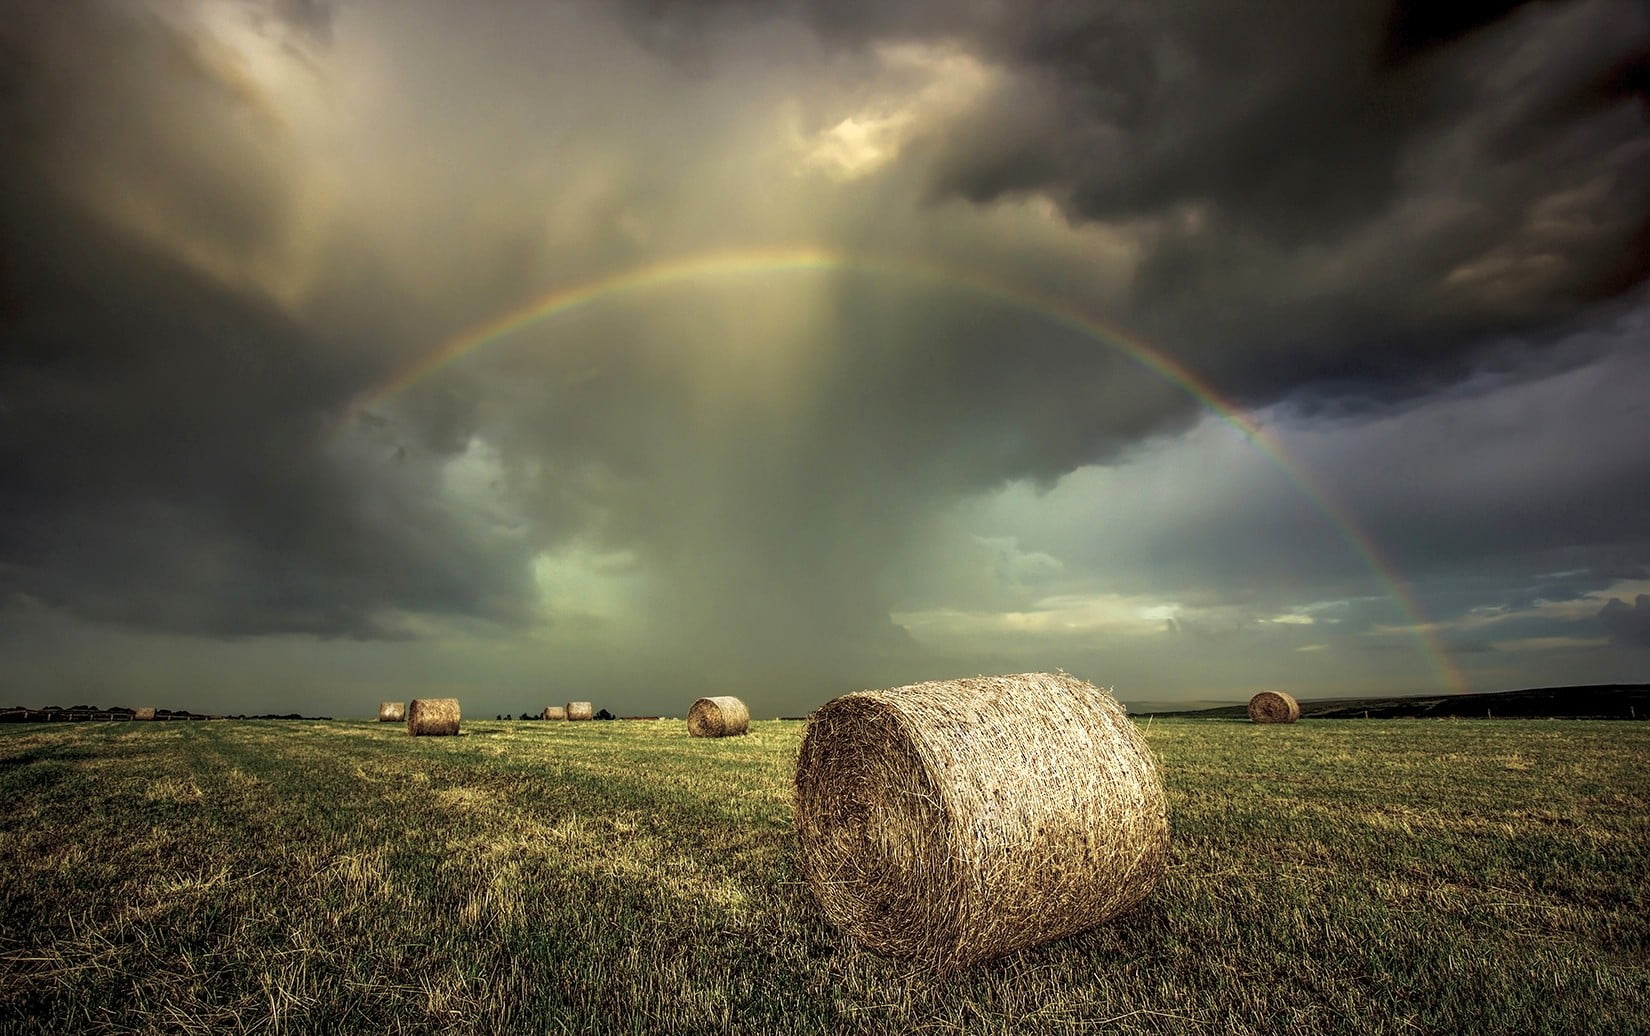 hay bale lot, rainbows, field, clouds, storm